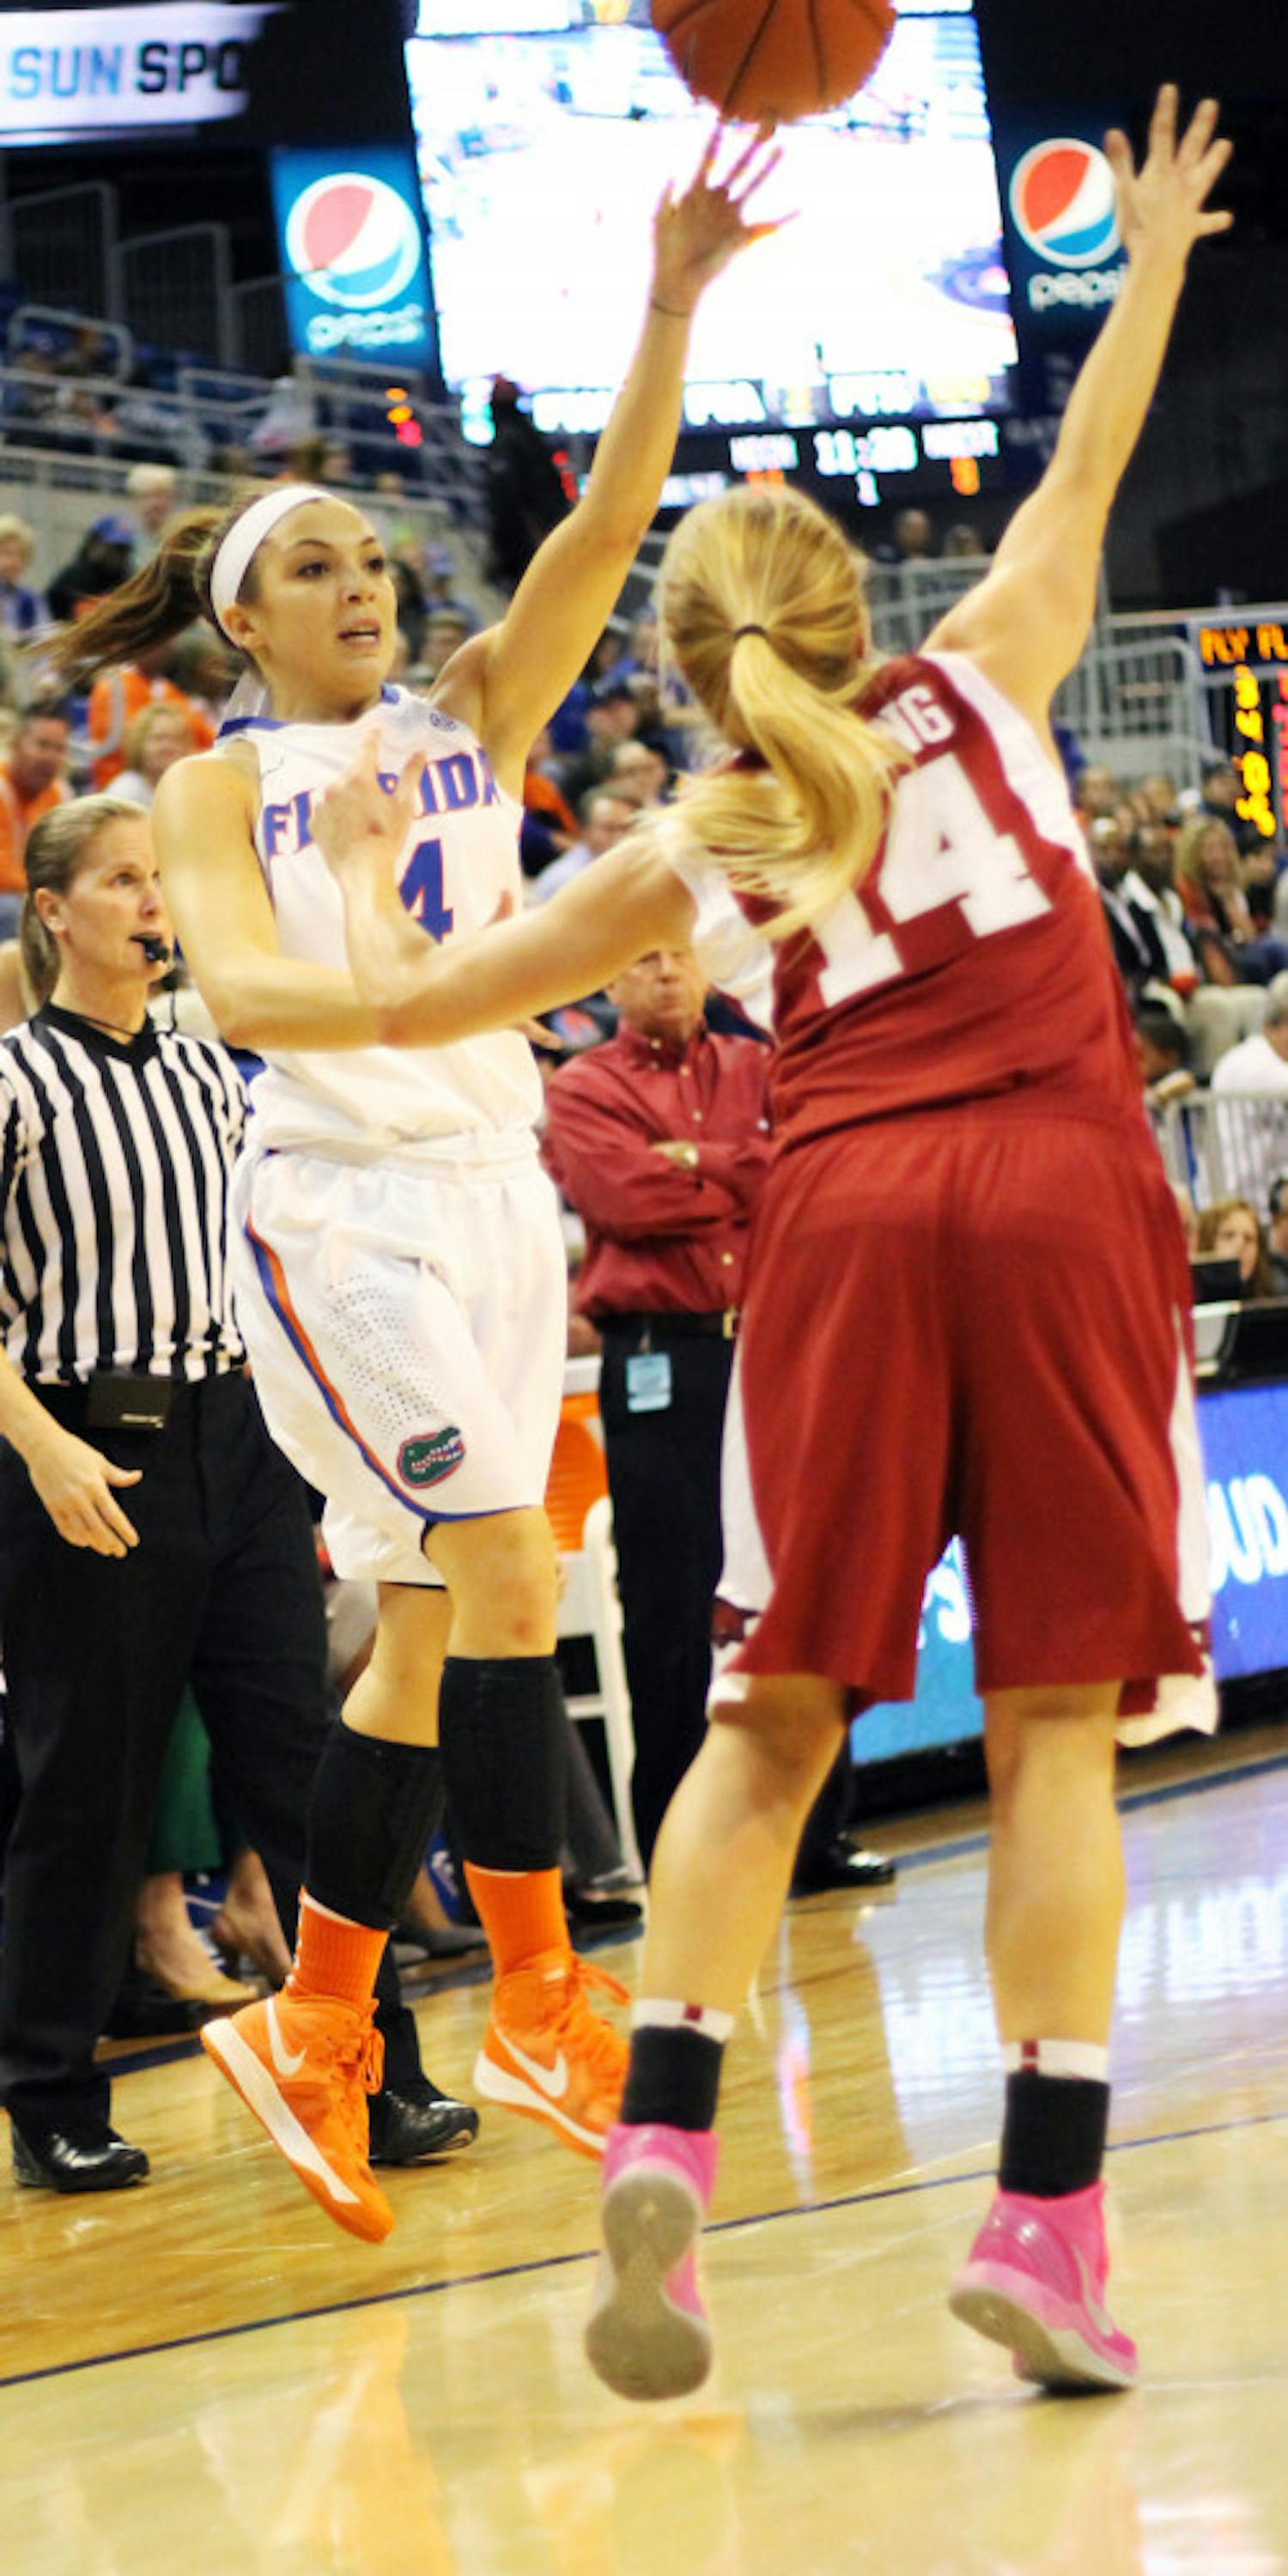 Guard Carlie Needles shoots during Florida's 69-58 loss to Arkansas on Feb. 28 in the O'Connell Center. Needles hit 34.1 percent of her three-point shots last season.